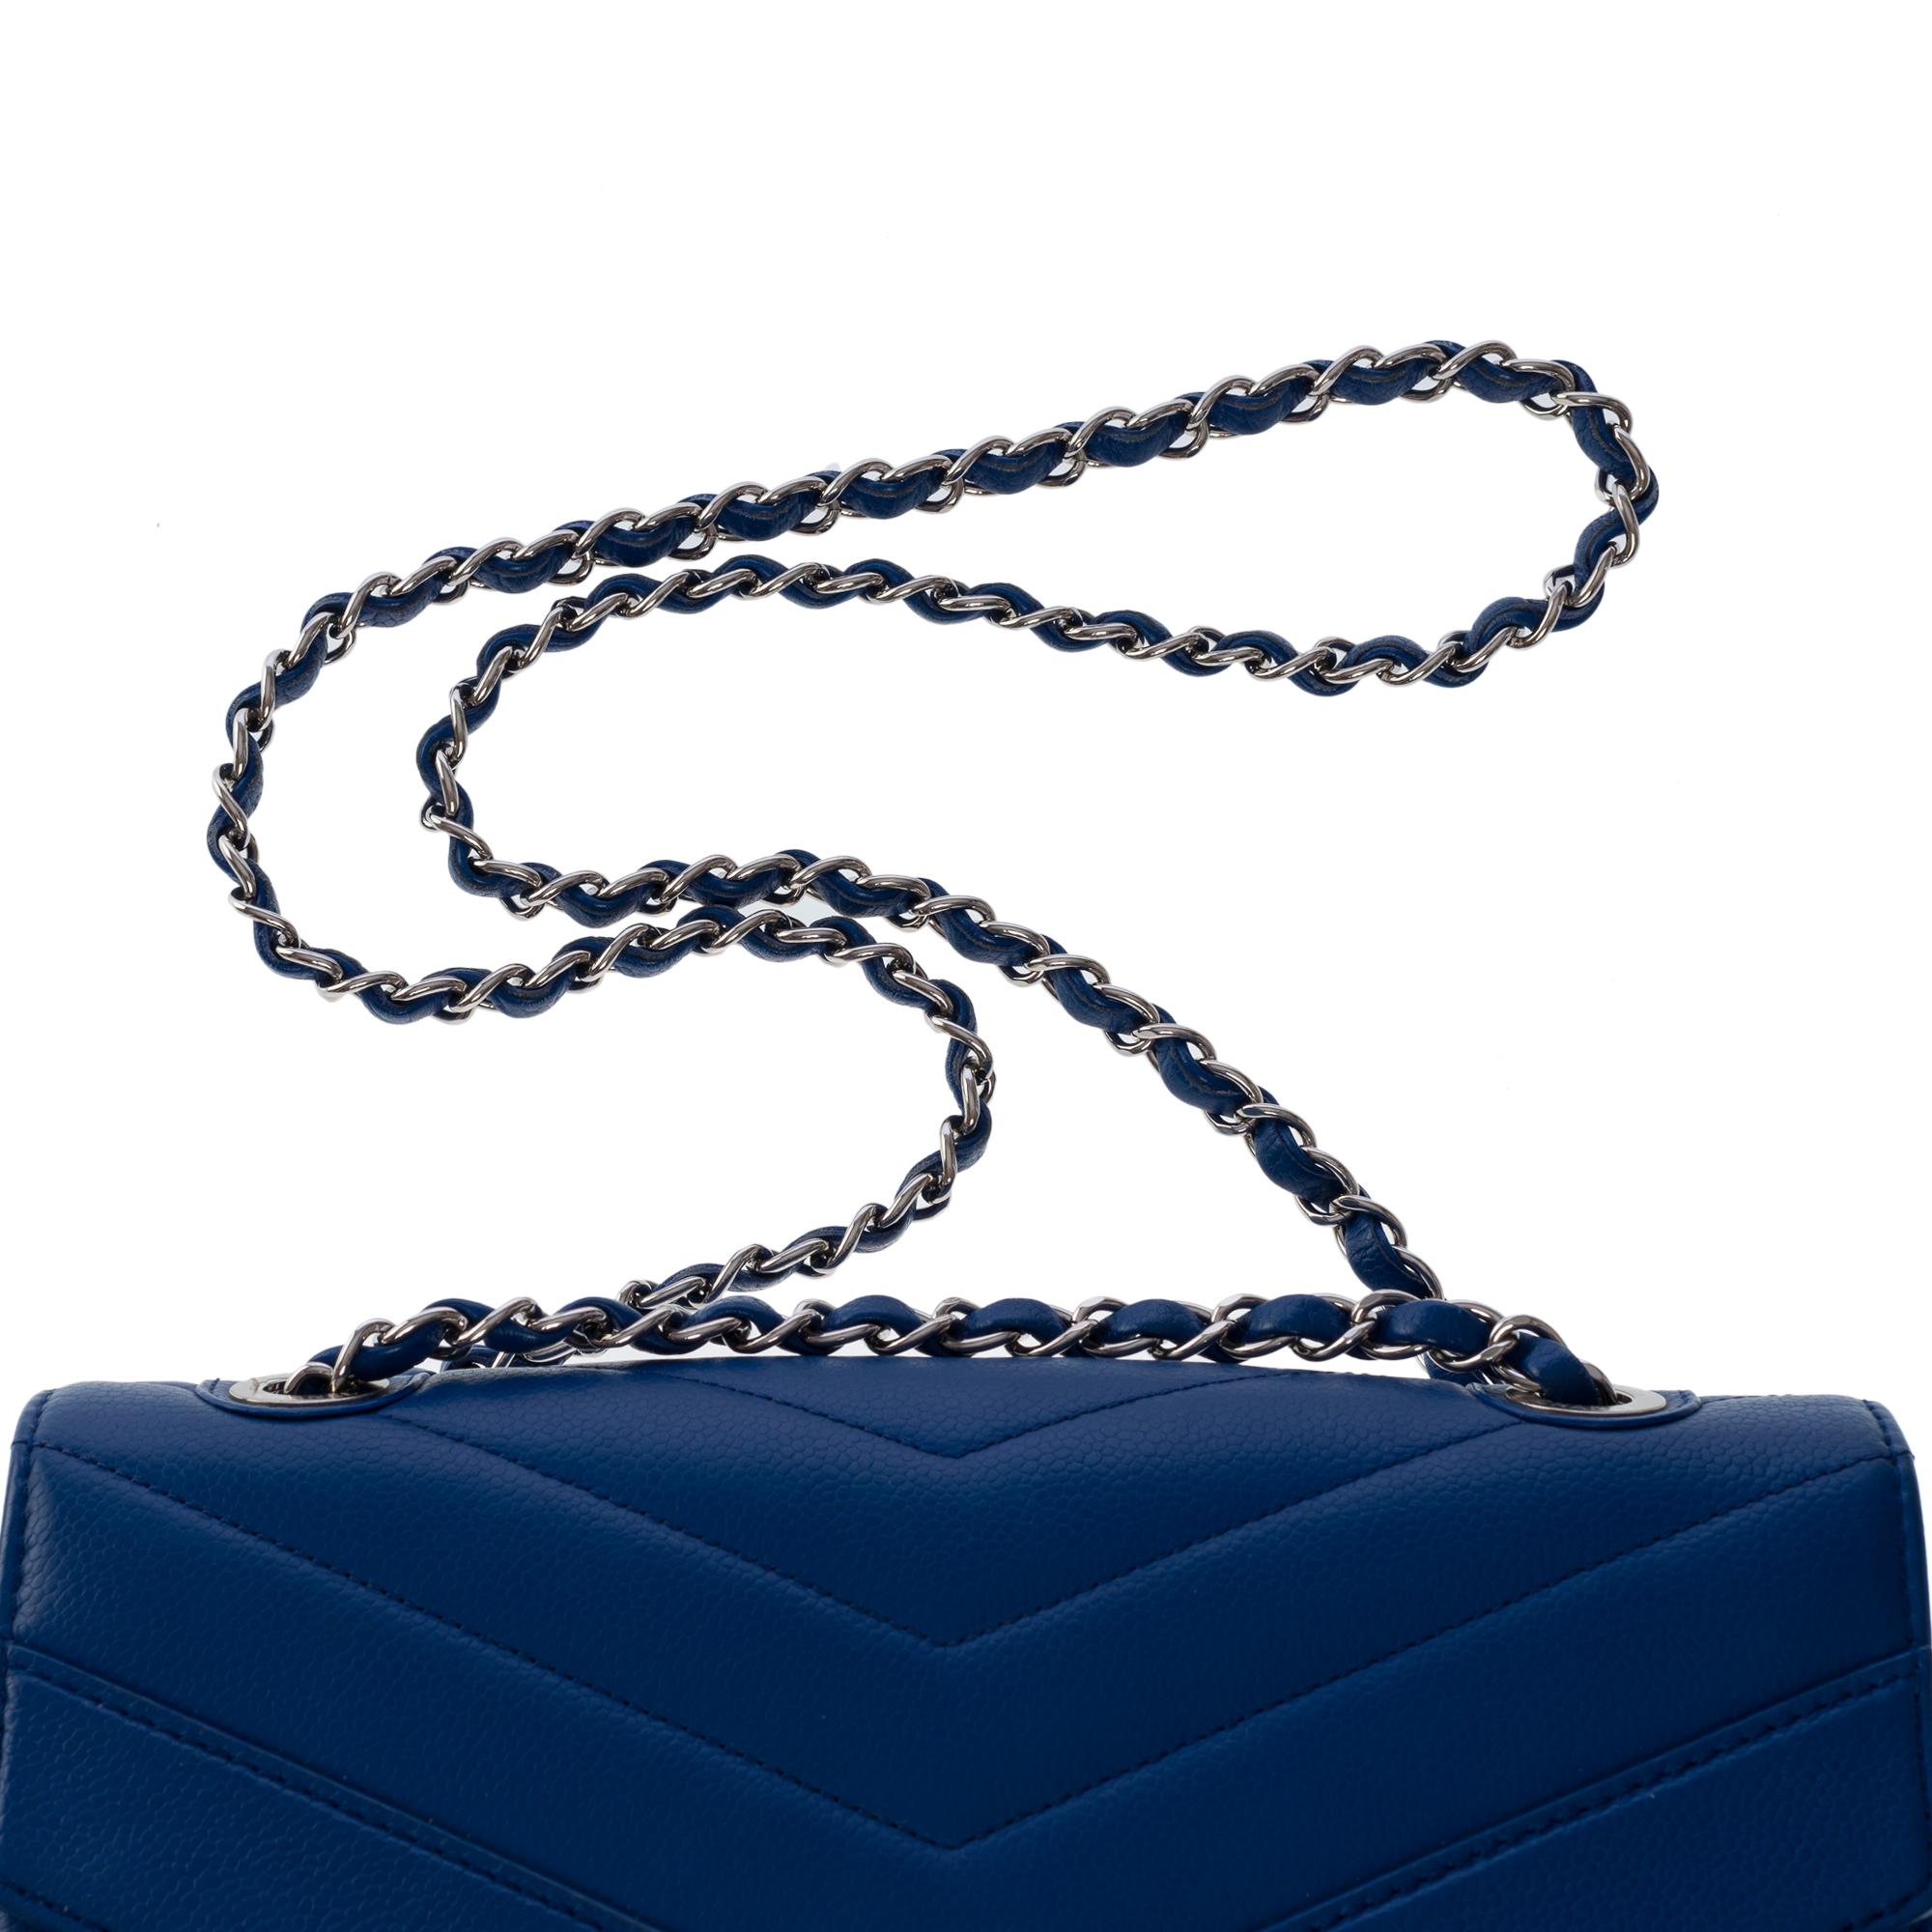 Chanel Classic shoulder flap bag in blue herringbone quilted caviar leather, SHW For Sale 5